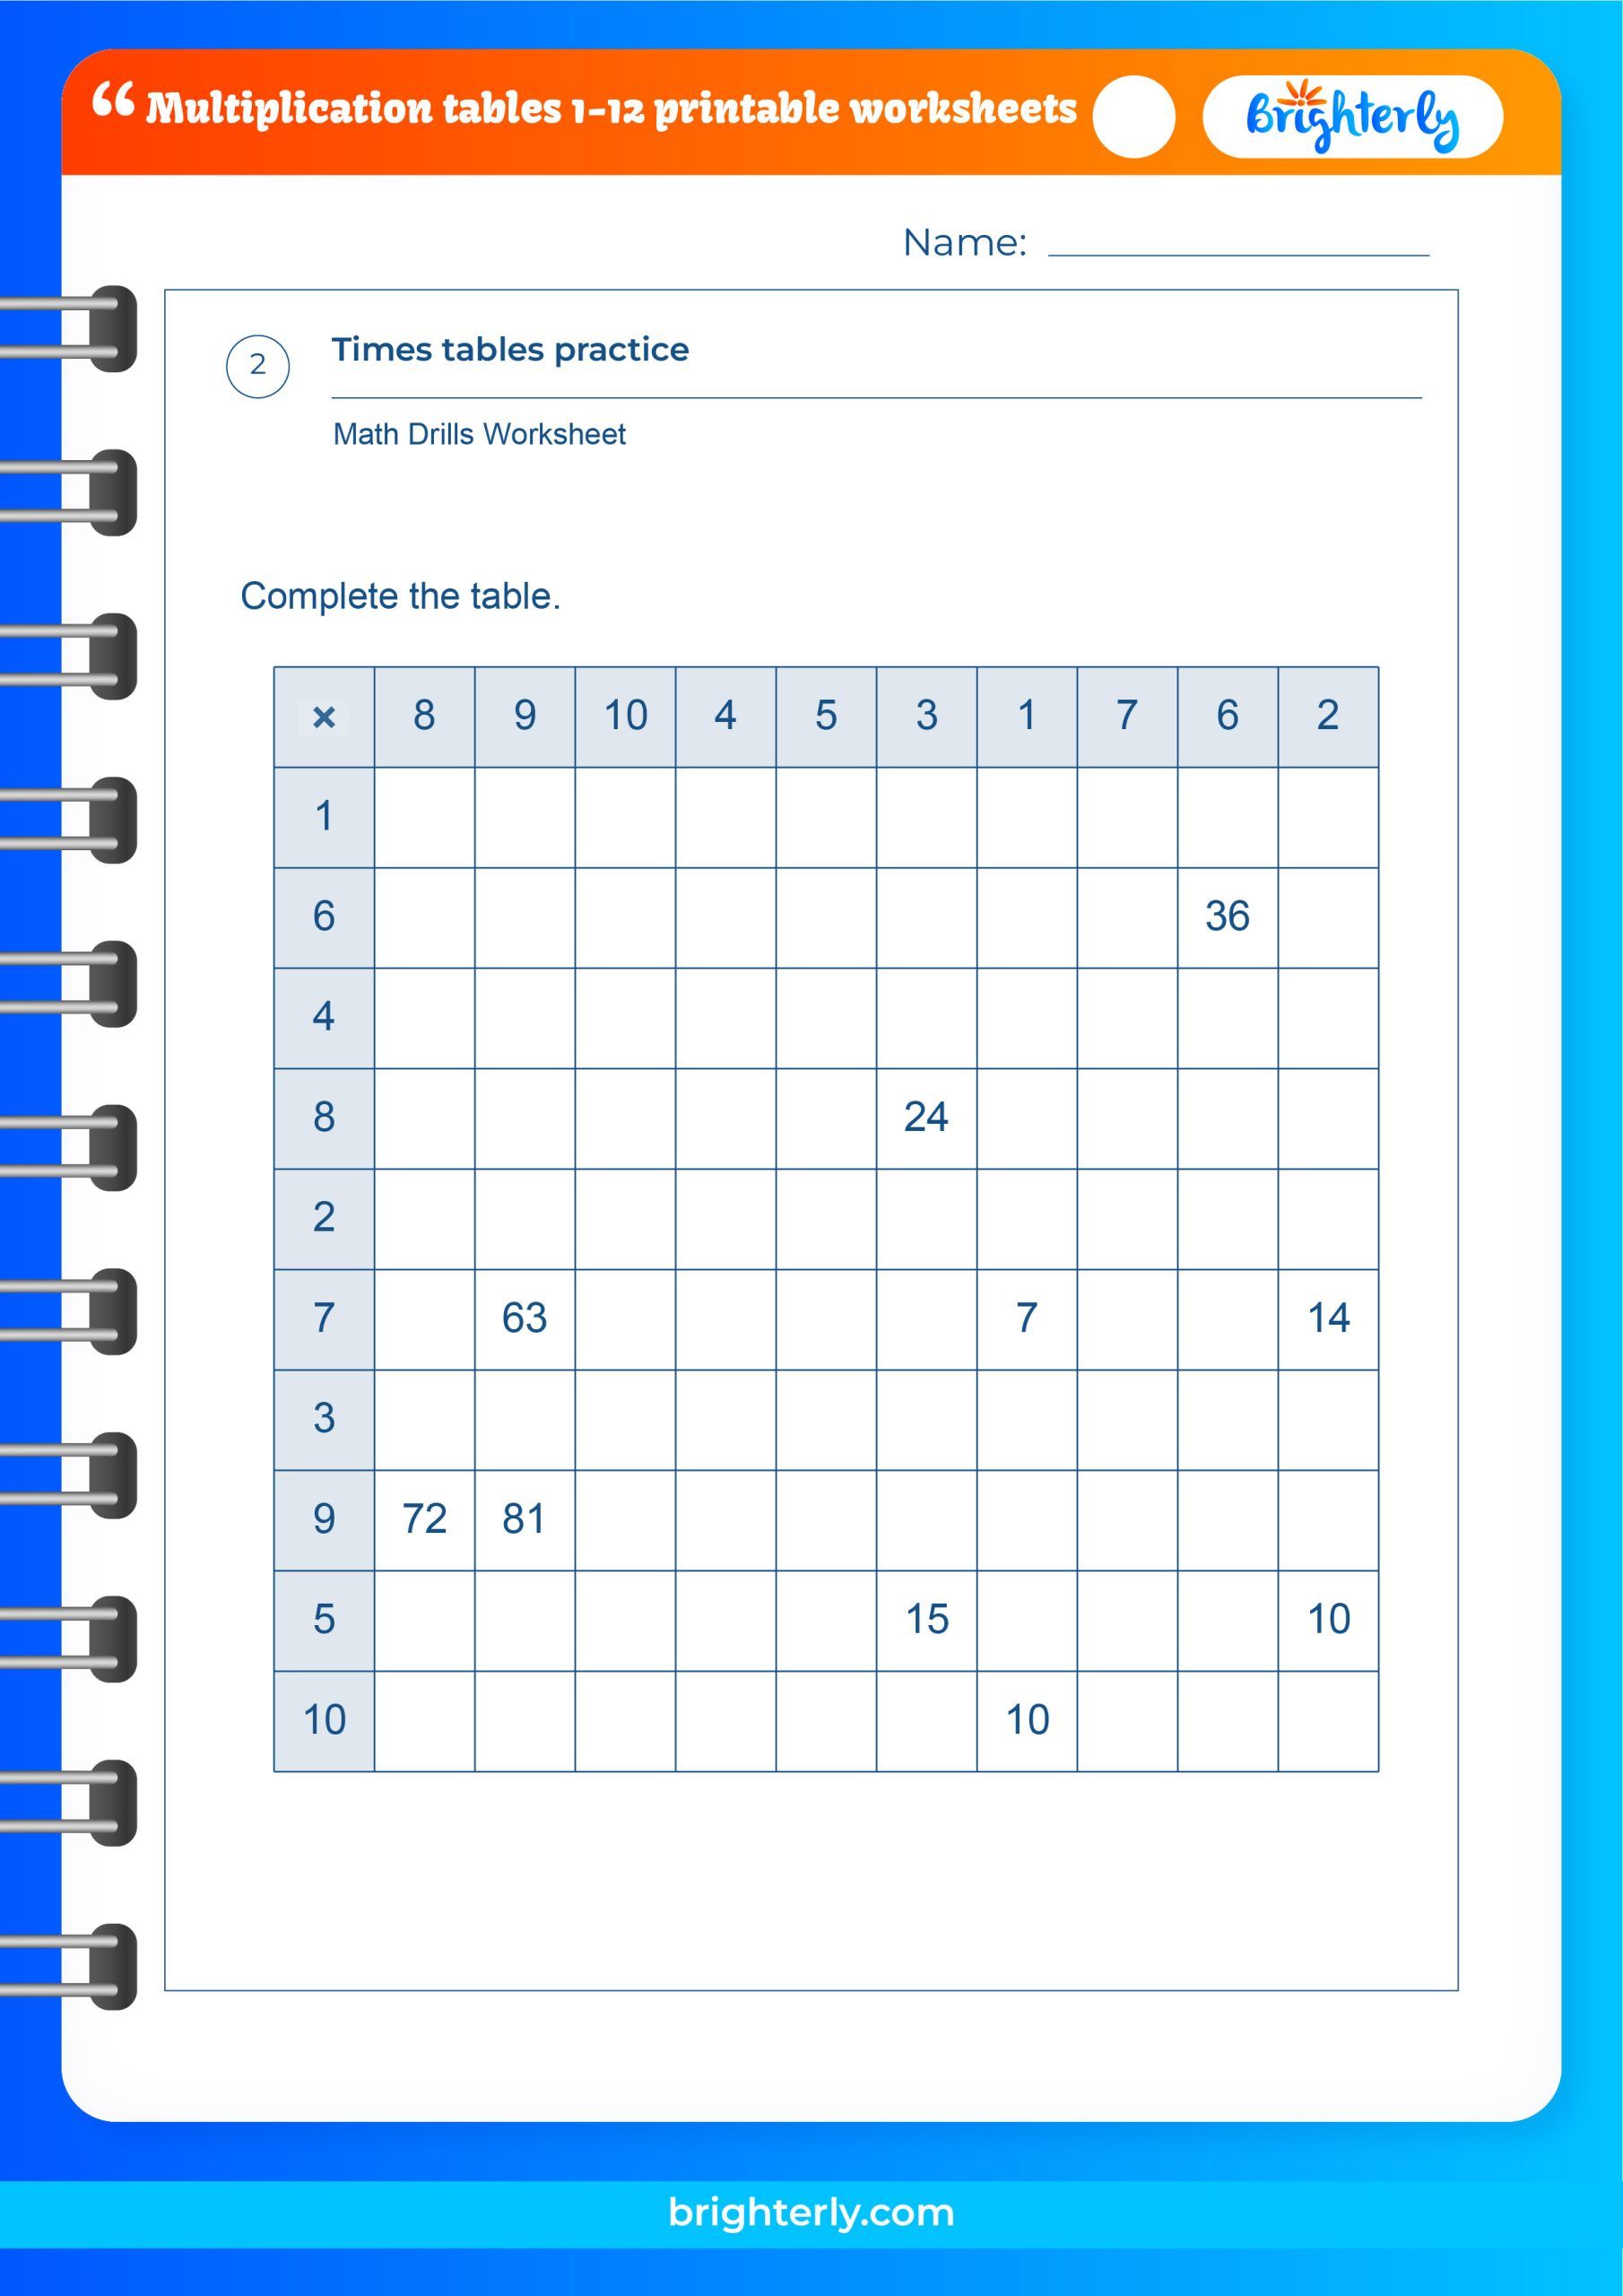 multiplication-tables-1-12-printable-worksheets-pdfs-brighterly